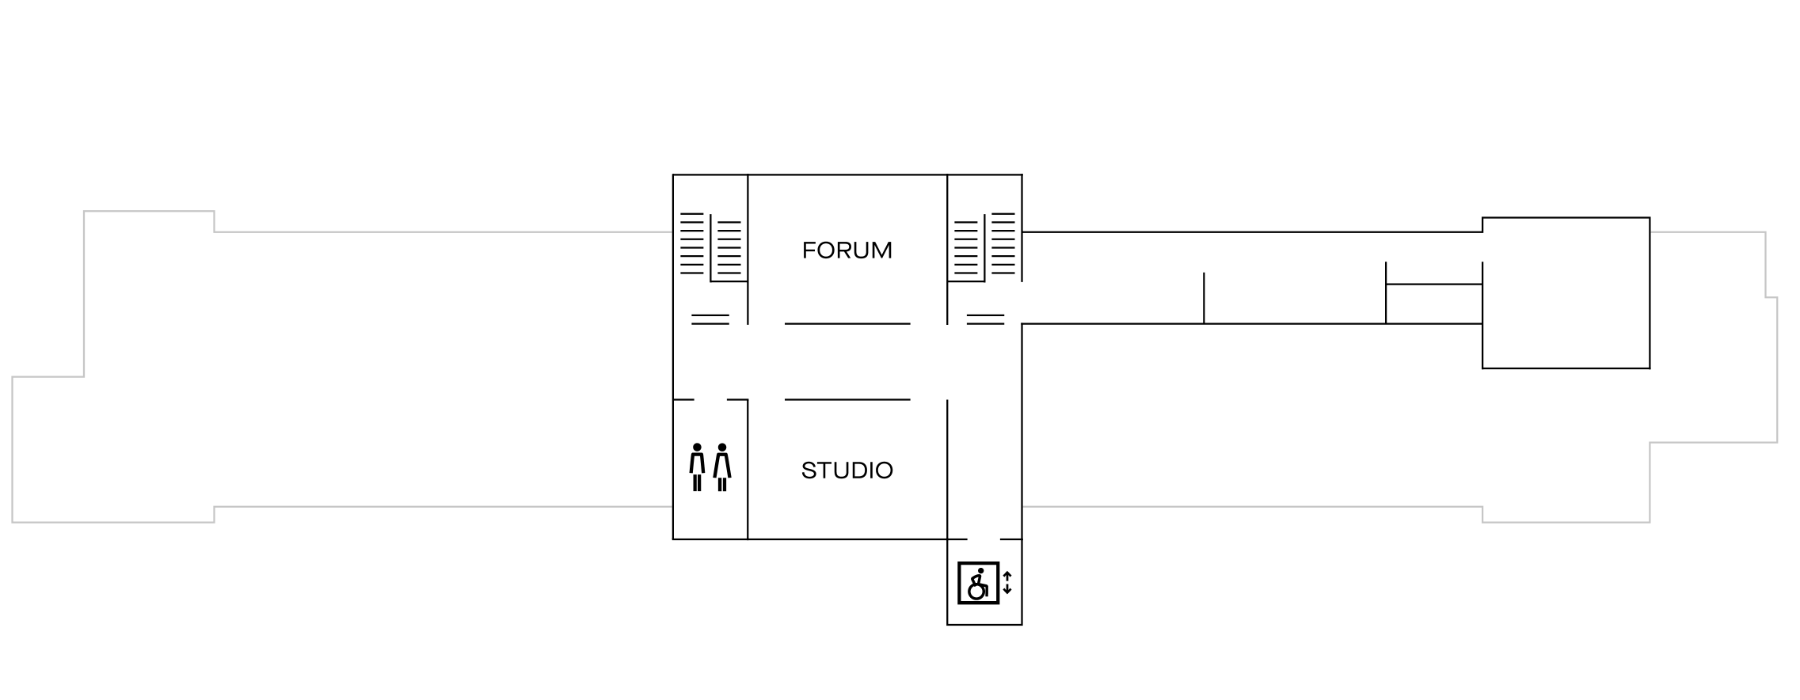 ground plan of the 3rd floor